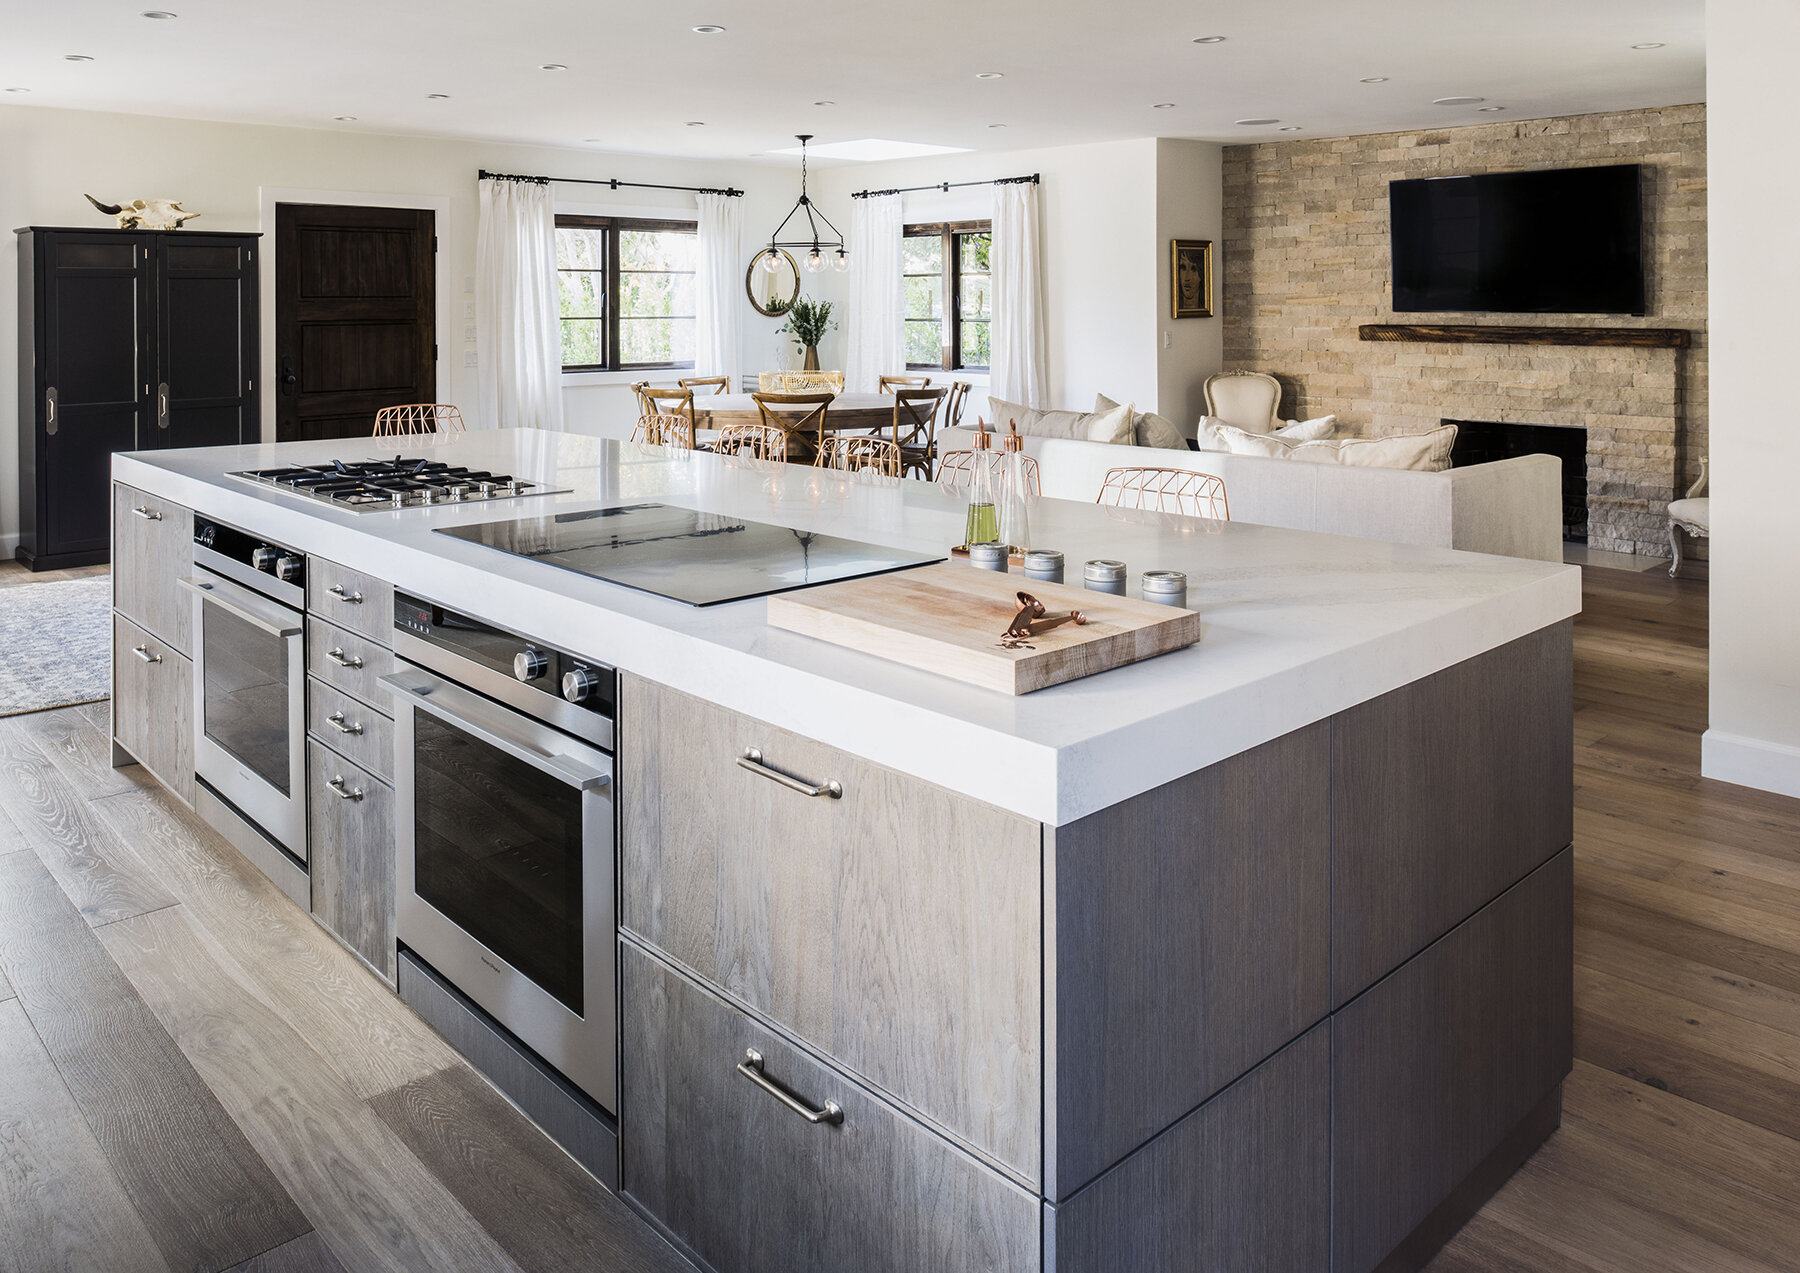 Can Your Kitchen Fit A Range Cooker? - Sustainable Kitchens